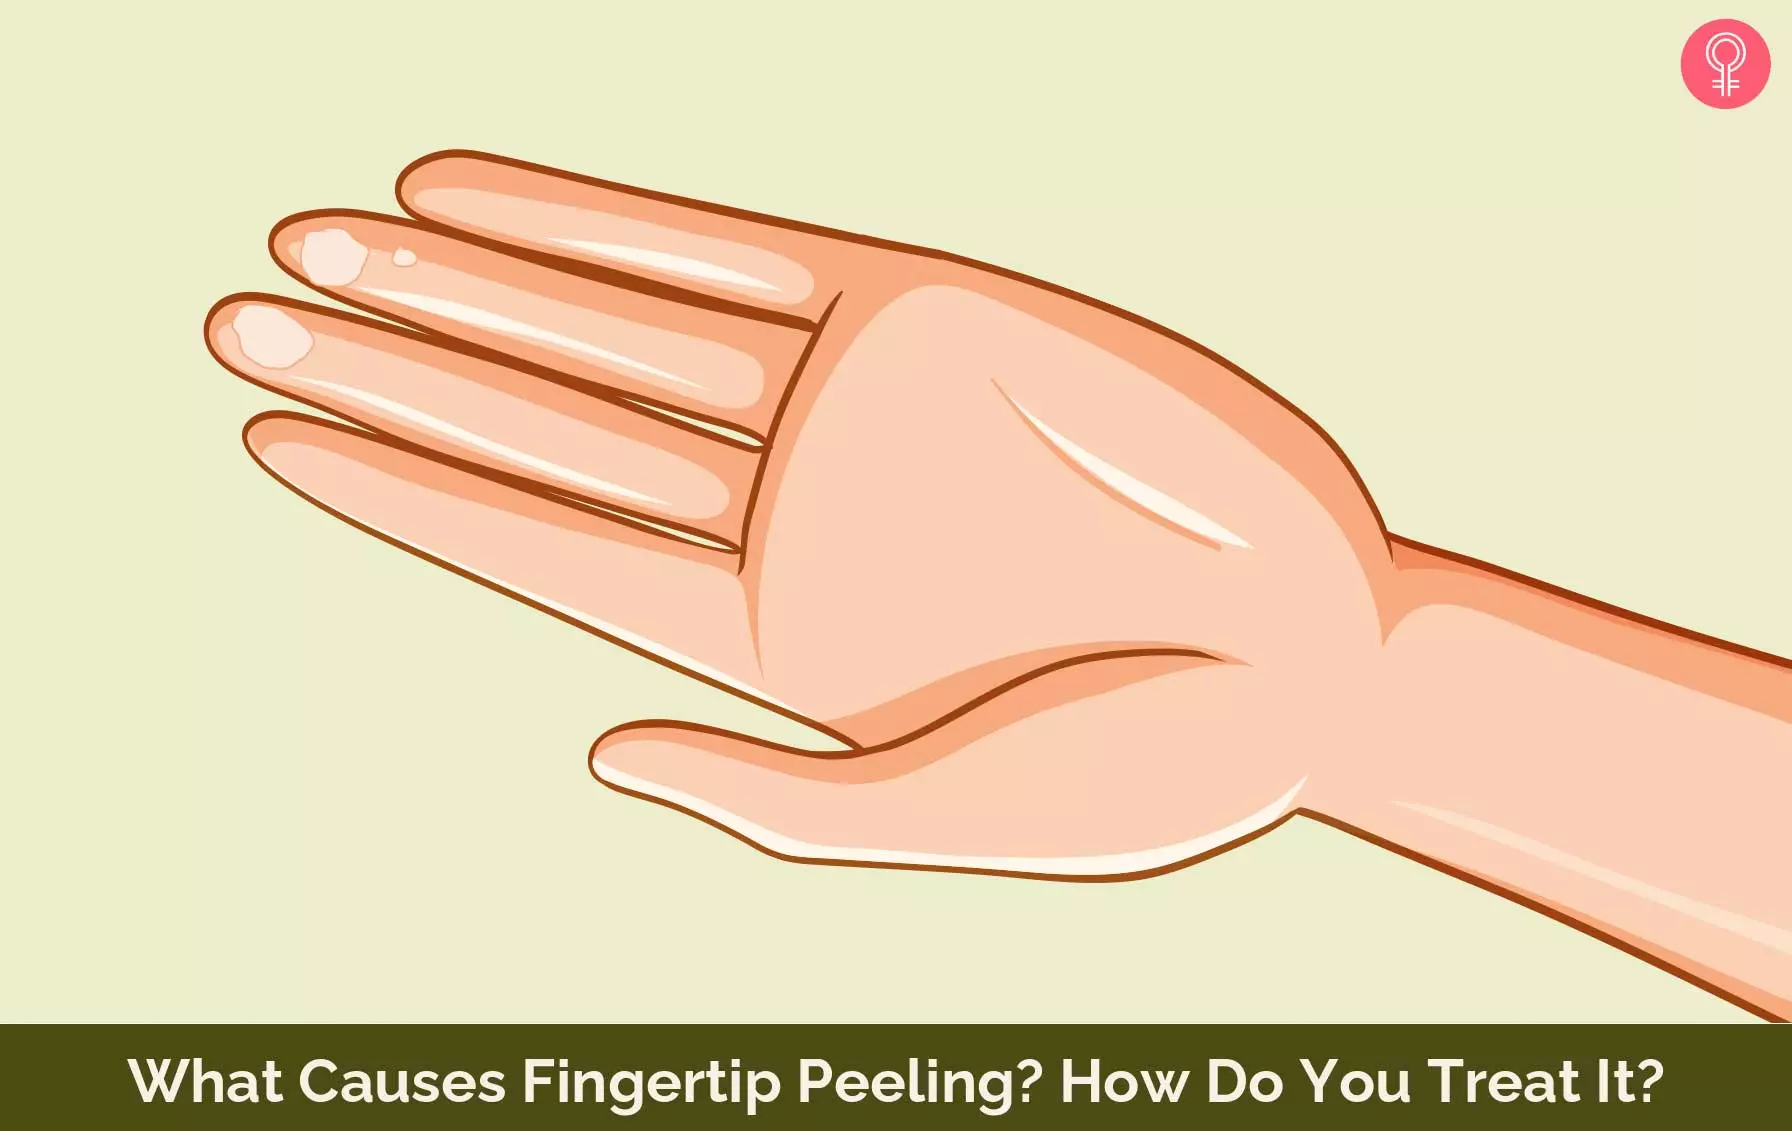 What Causes Fingertip Peeling? How Do You Treat It?